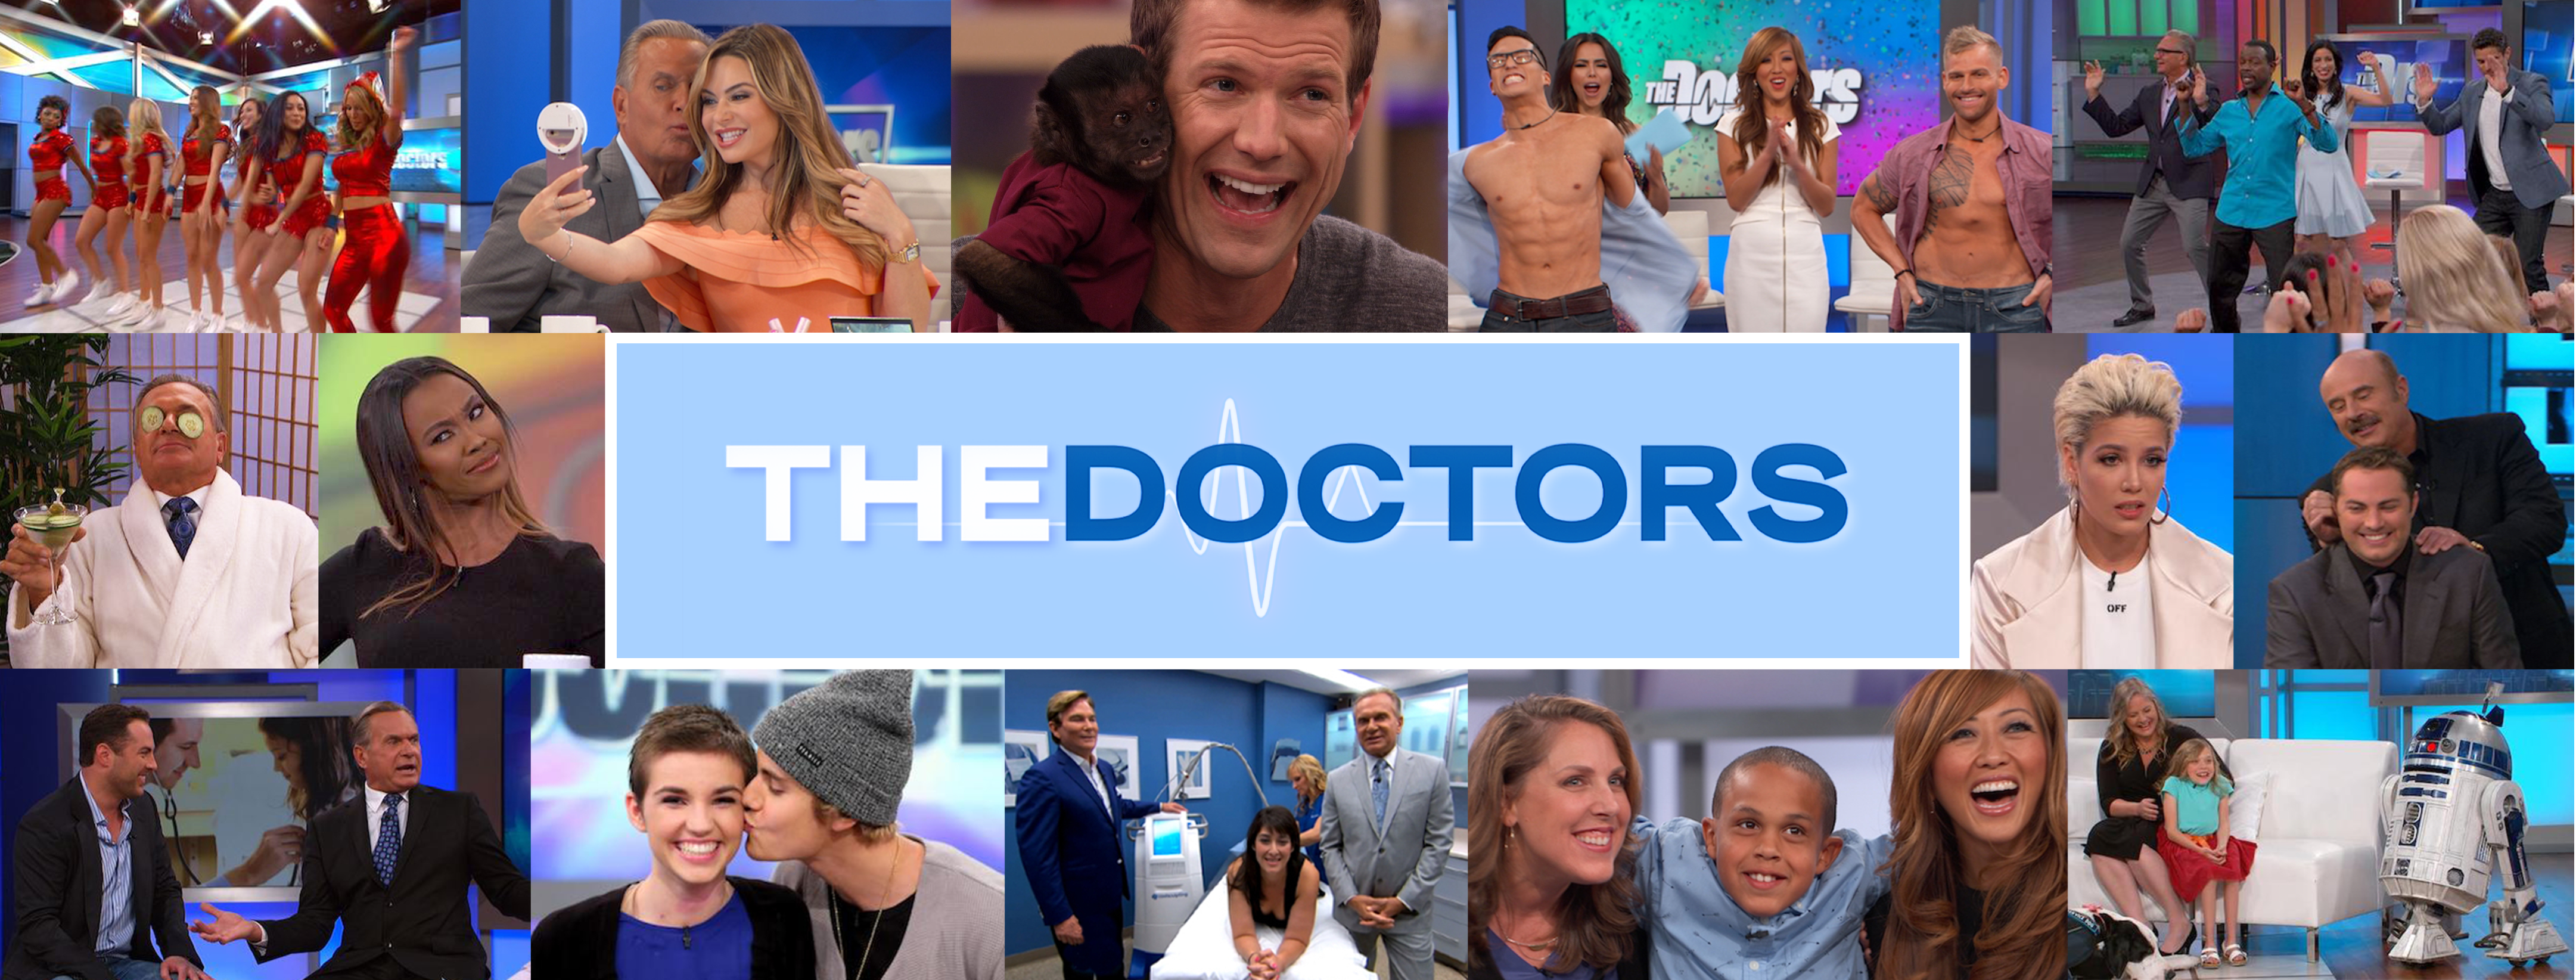 Virtual Reality Dating App The Doctors Tv Show